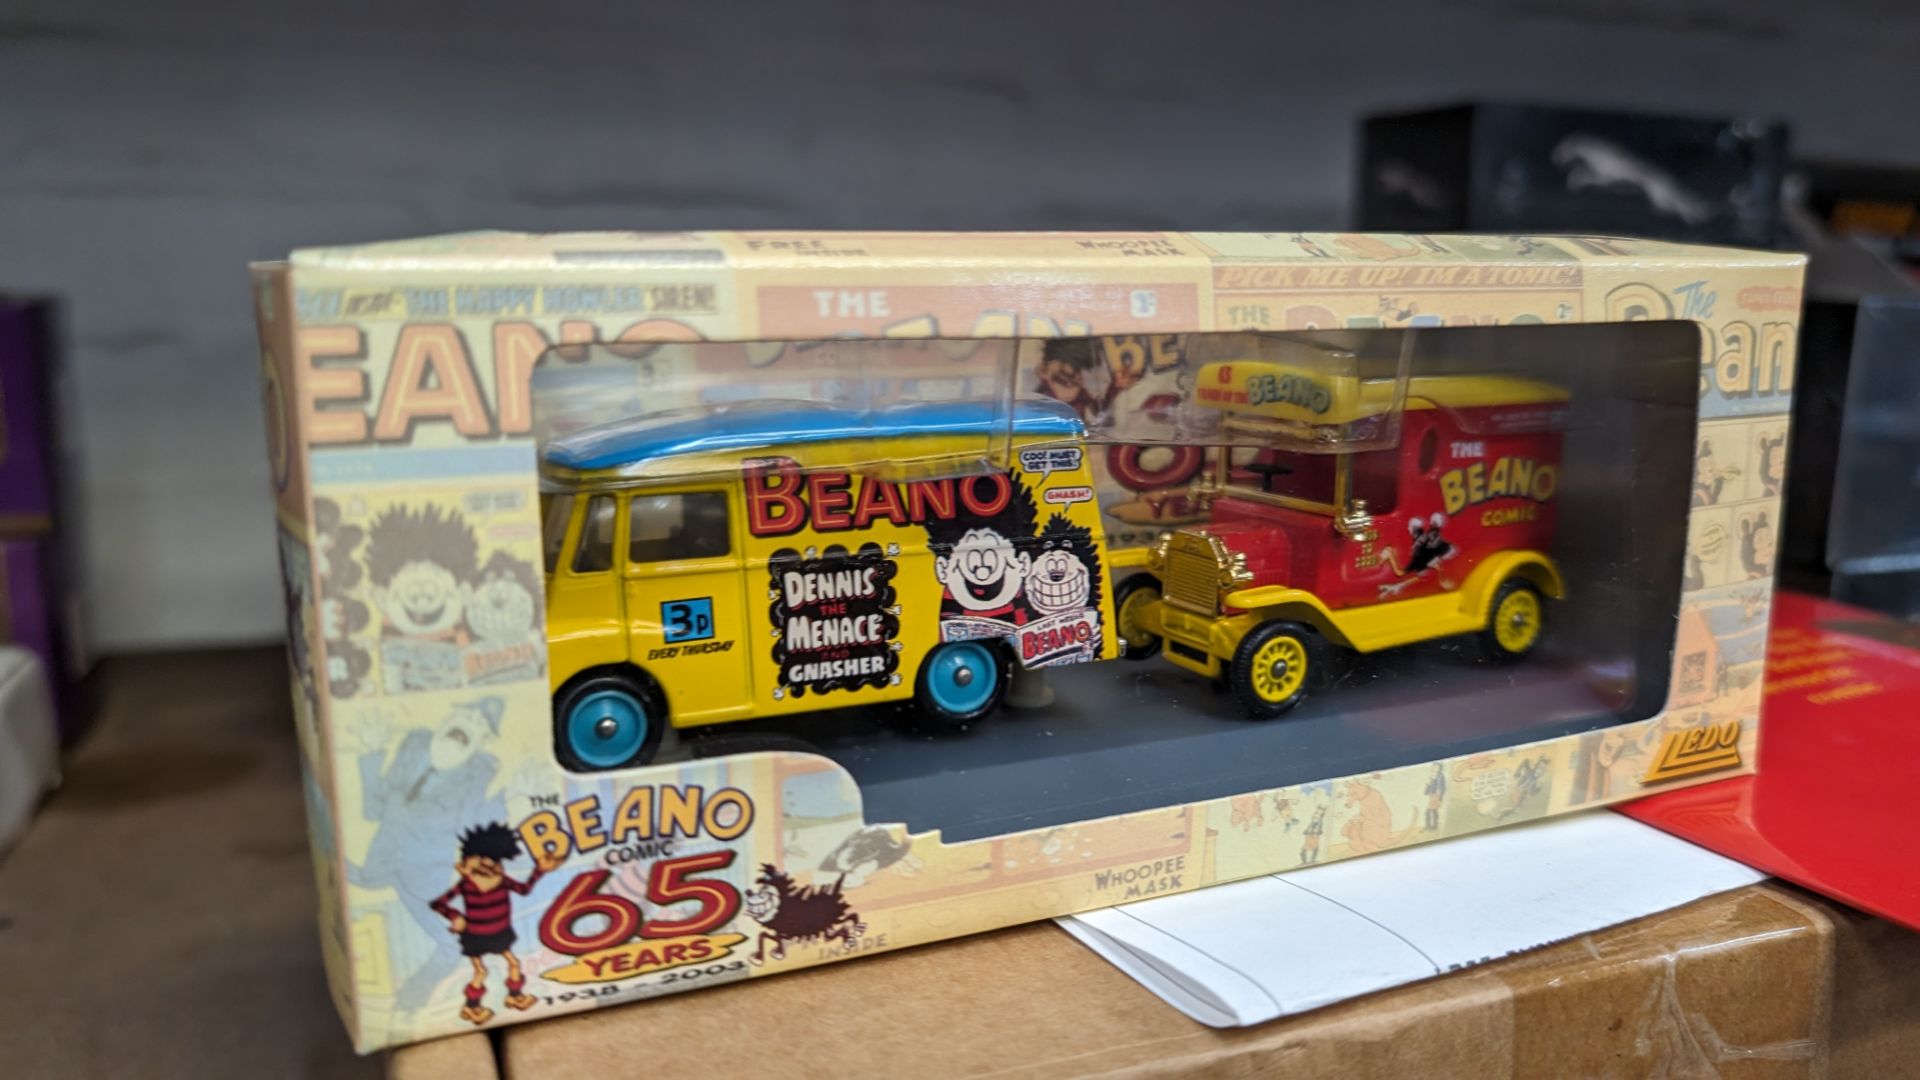 Beano 65th anniversary gift set including reproduction of the first edition of the comic plus 2 mode - Image 4 of 9